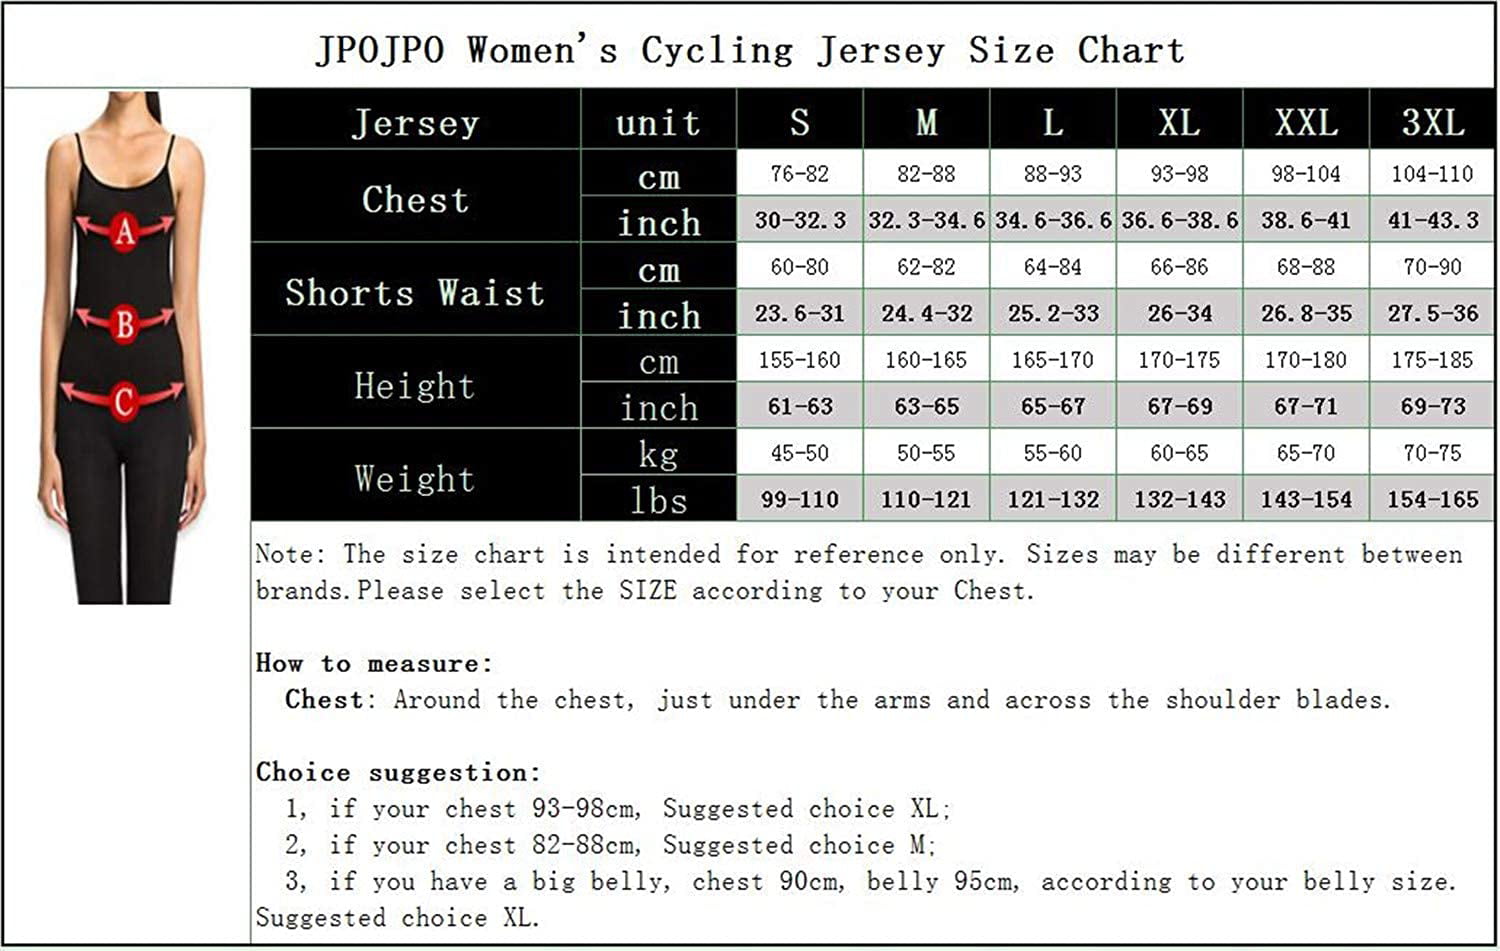 Women Cycling Jersey Set Short Sleeve+5D Padded Bicycle Shorts Quick-Dry Reflective 3-Pockets 